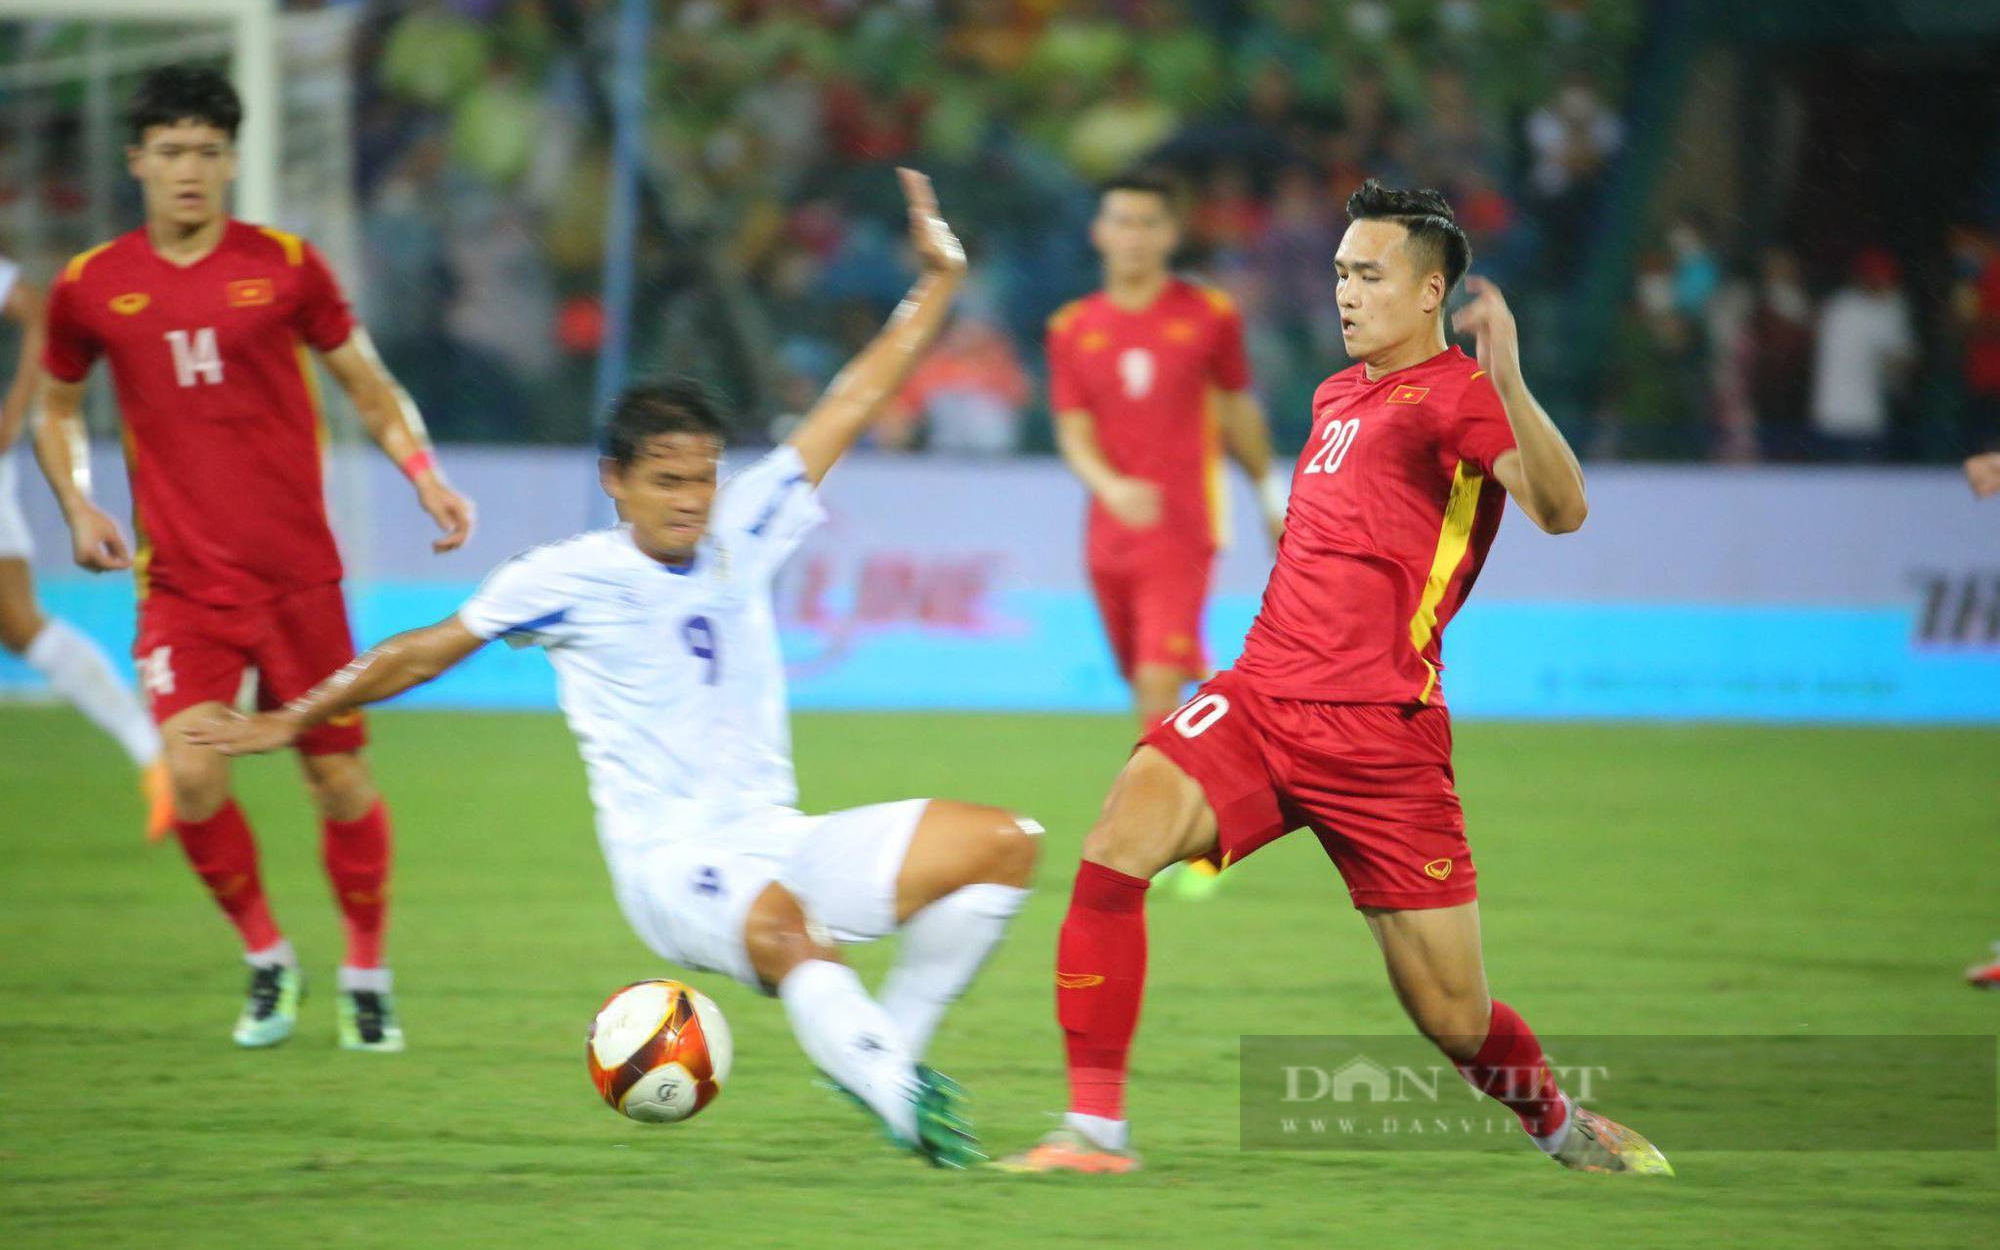 “Without careful adjustment of the “gauge”, U23 Vietnam easily holds a grudge against U23 Myanmar”